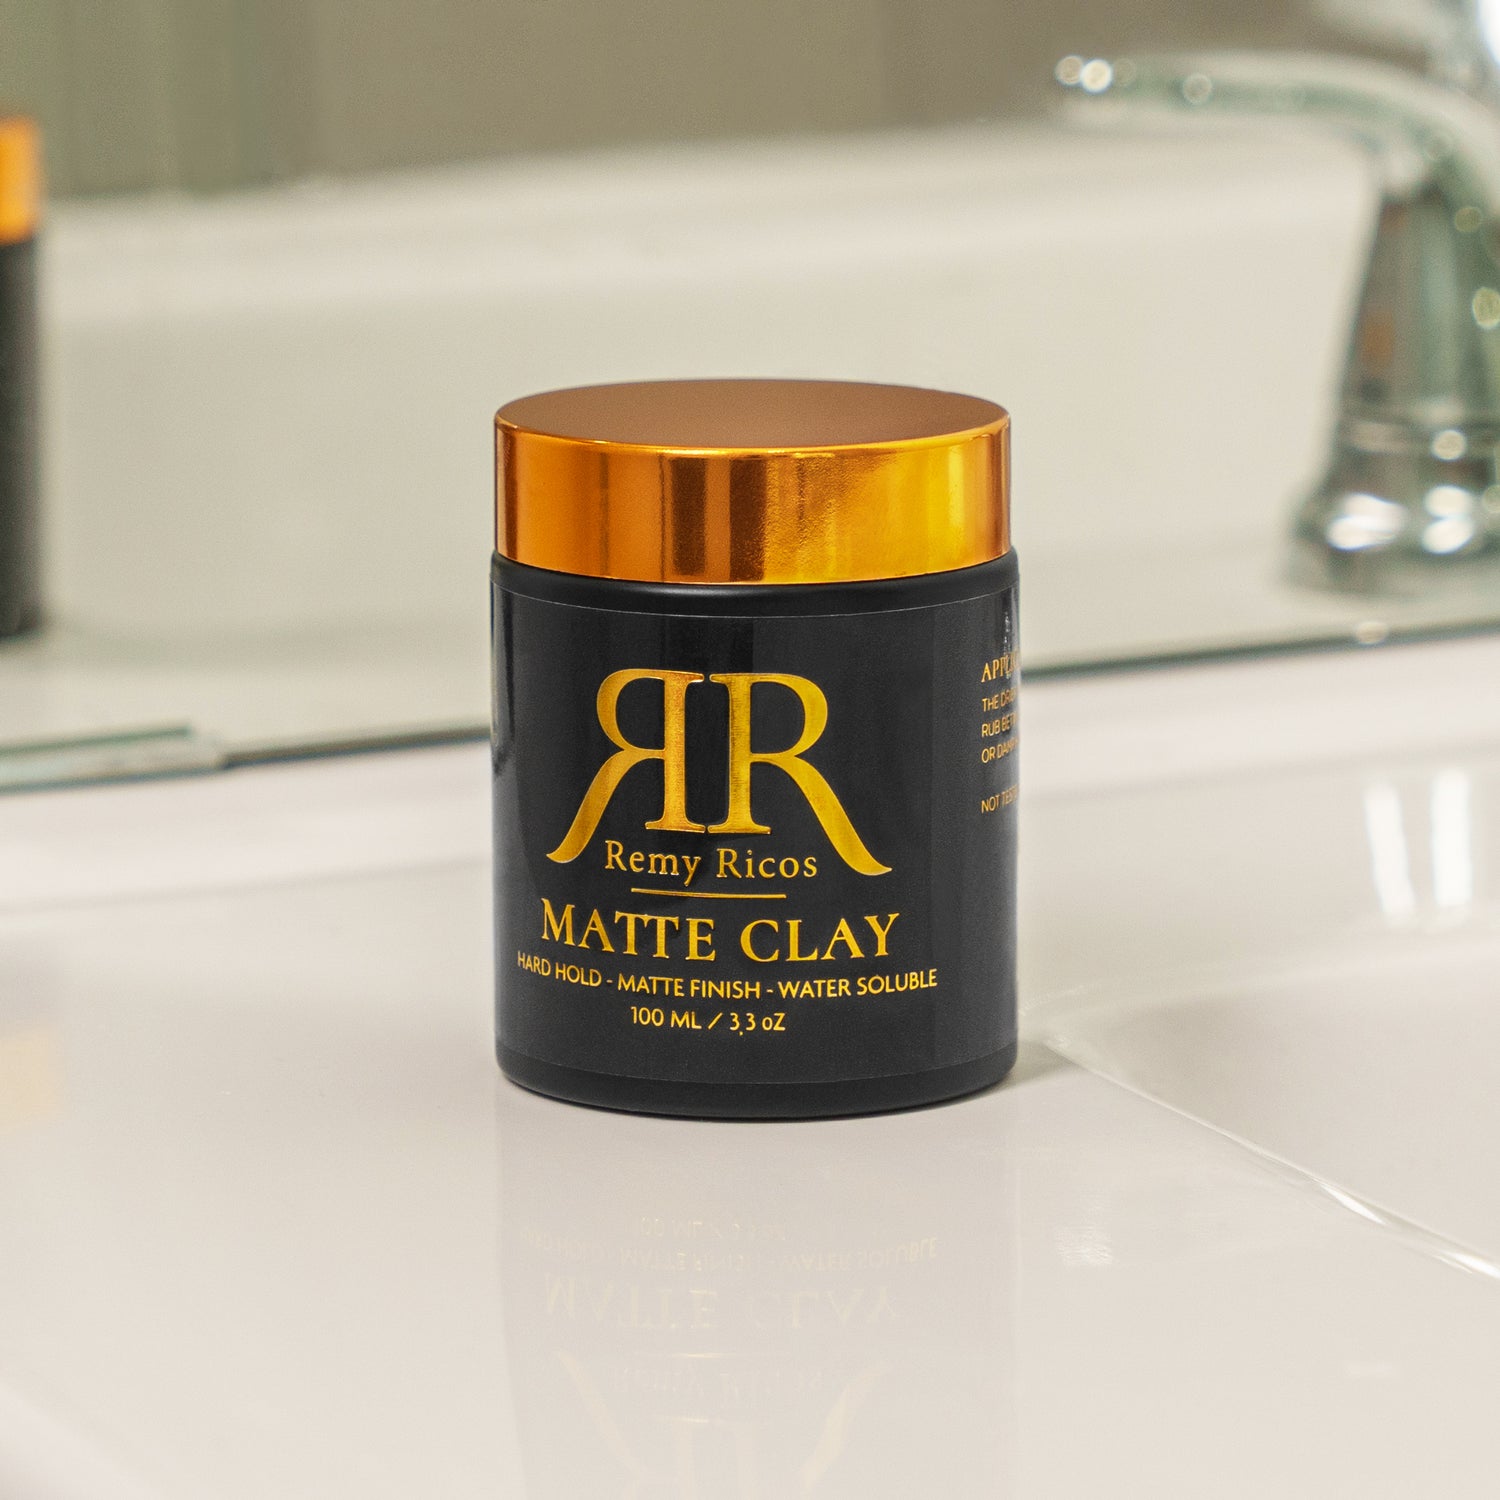 MATTE CLAY - REMY RICOS